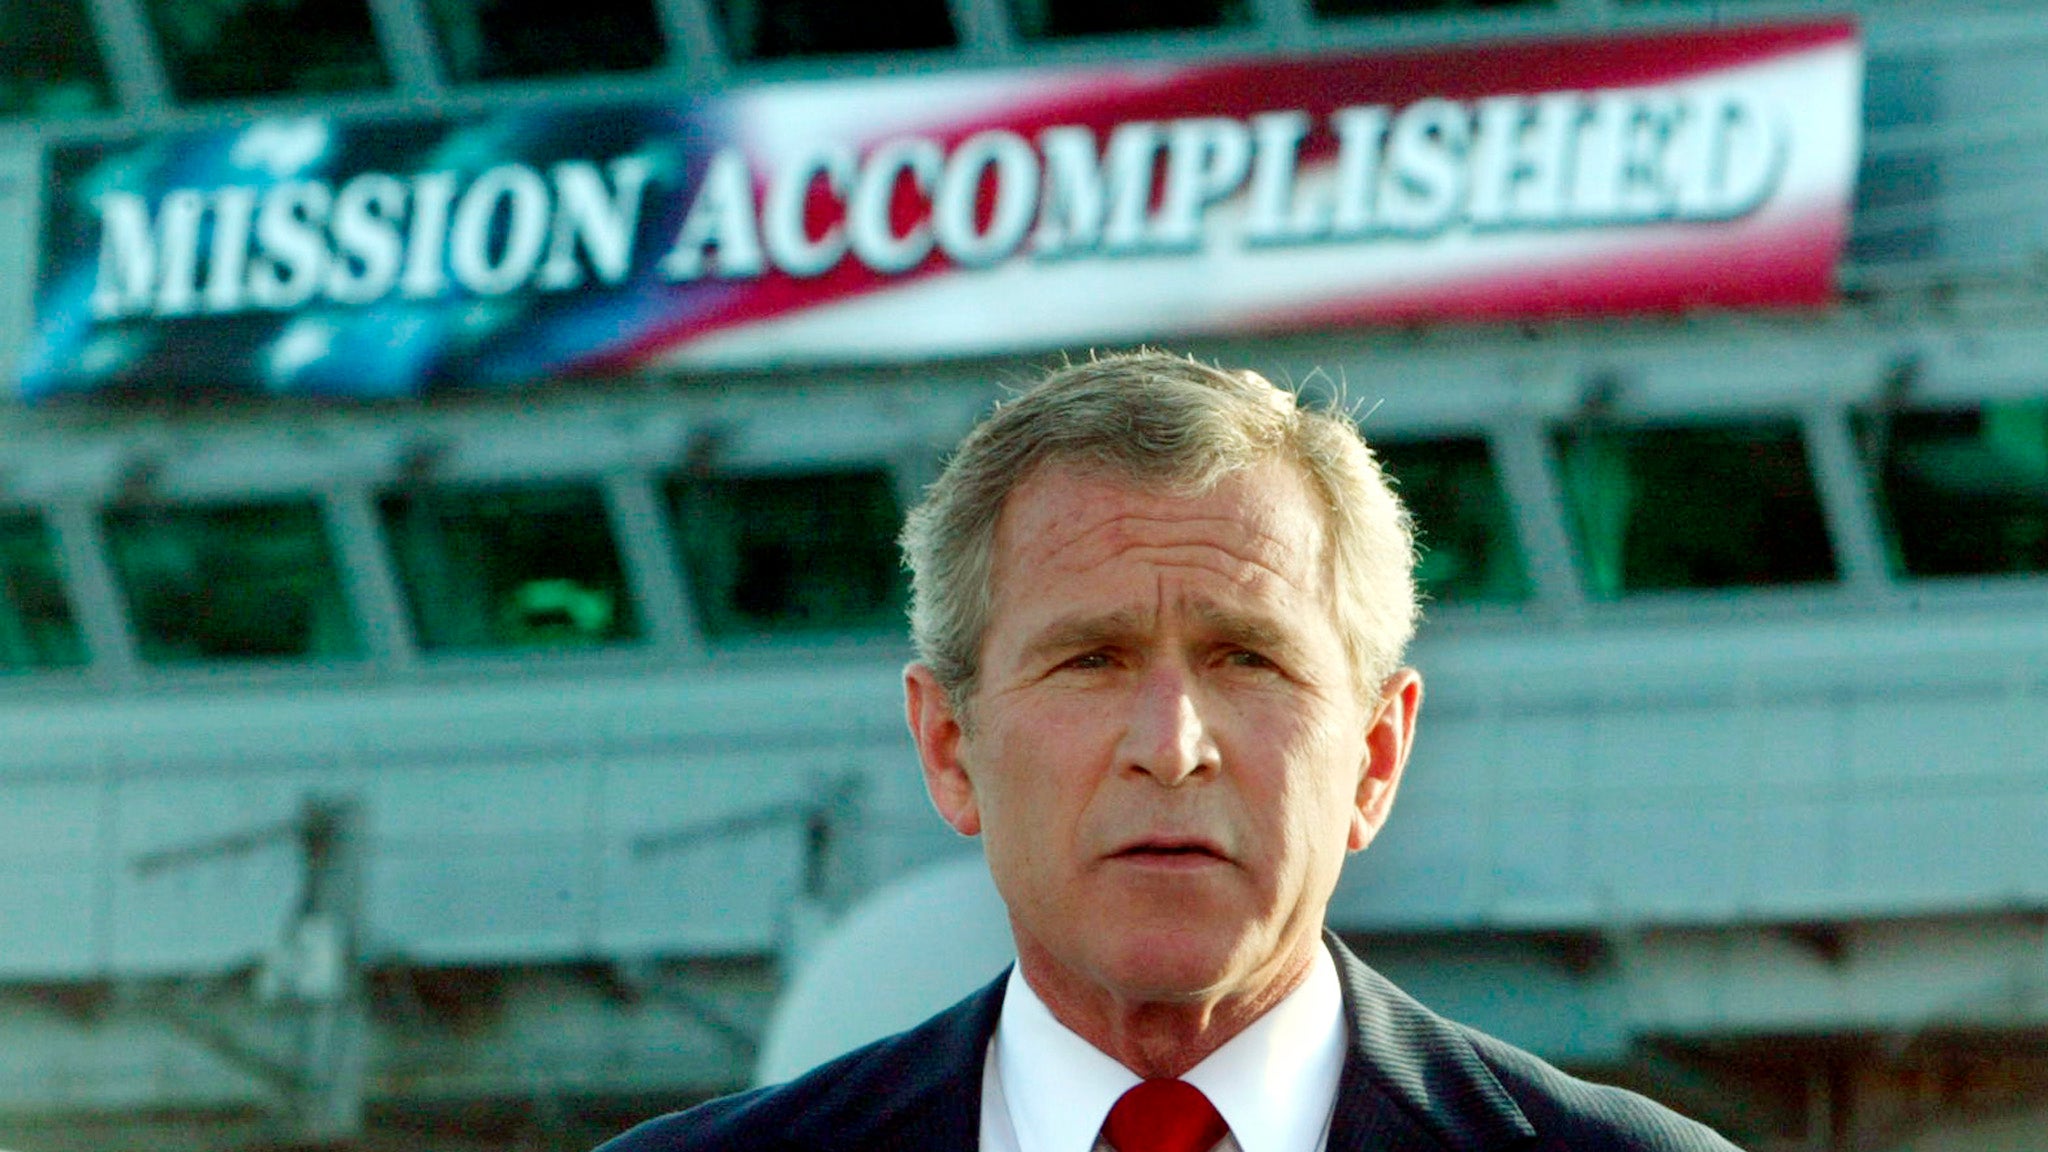 George W Bush declares combat in Iraq over aboard aircraft carrier USS Abraham Lincoln in 2003